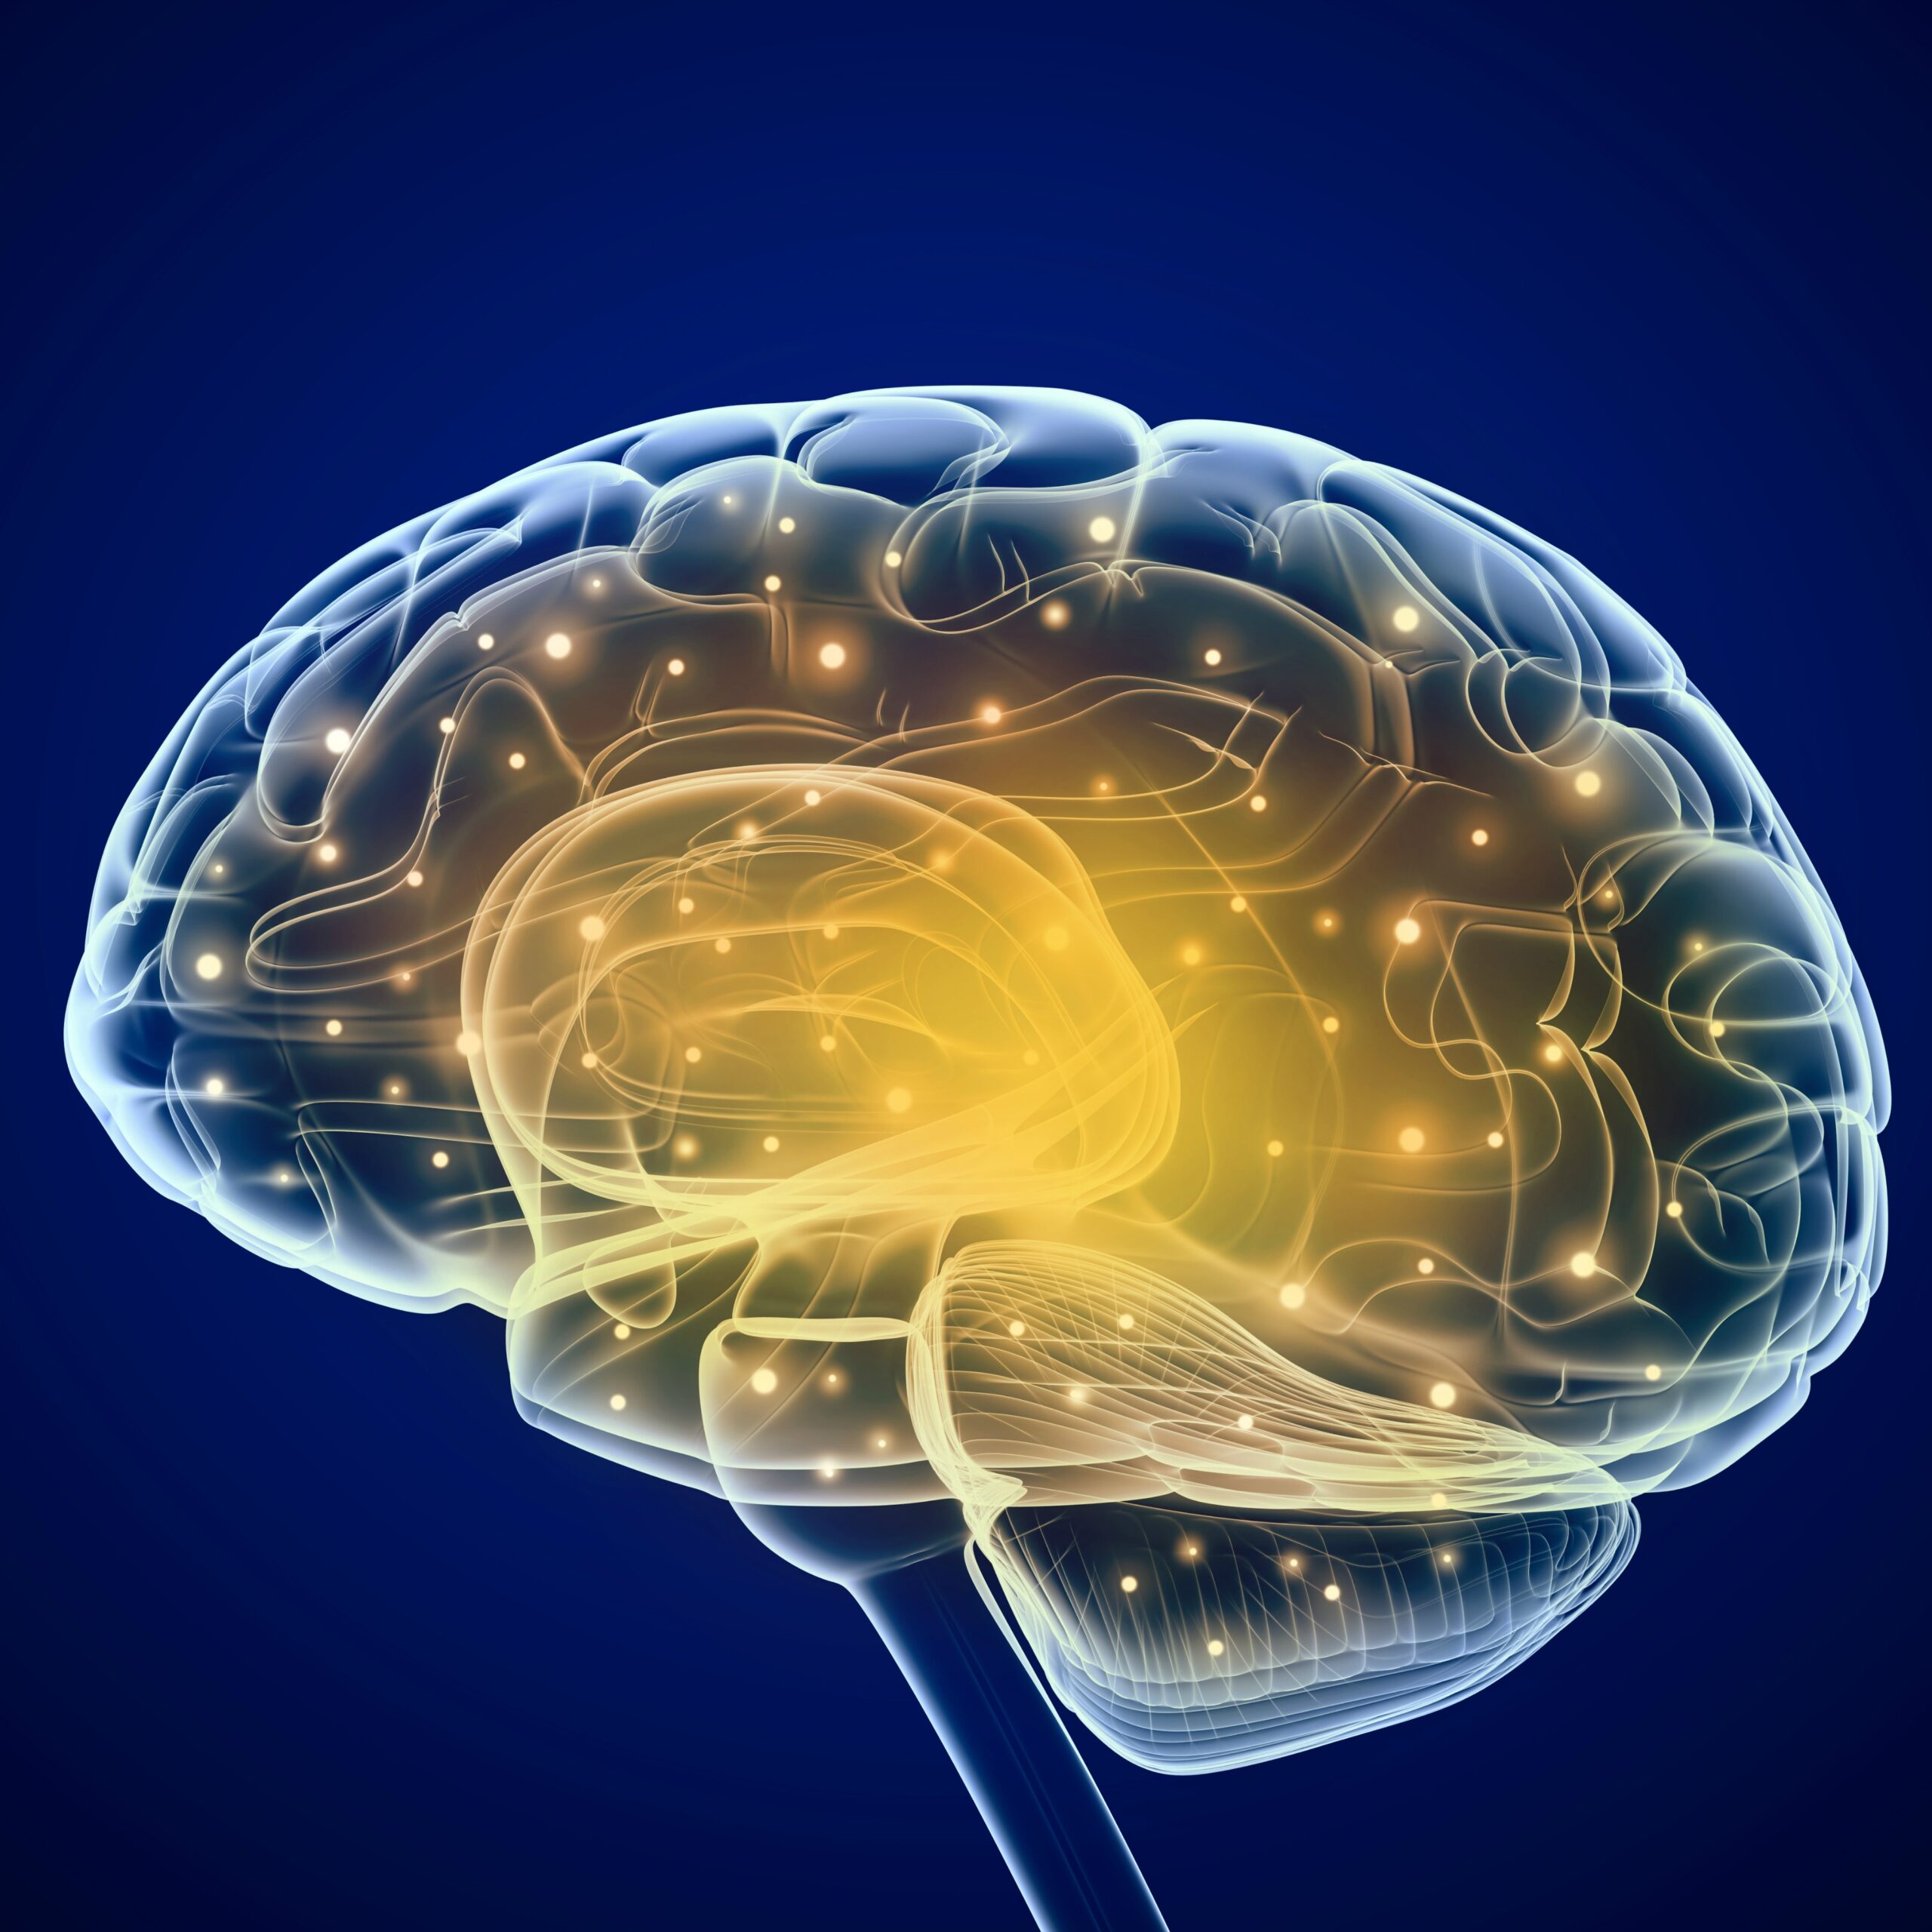 Brain Aging Earlier Than Thought